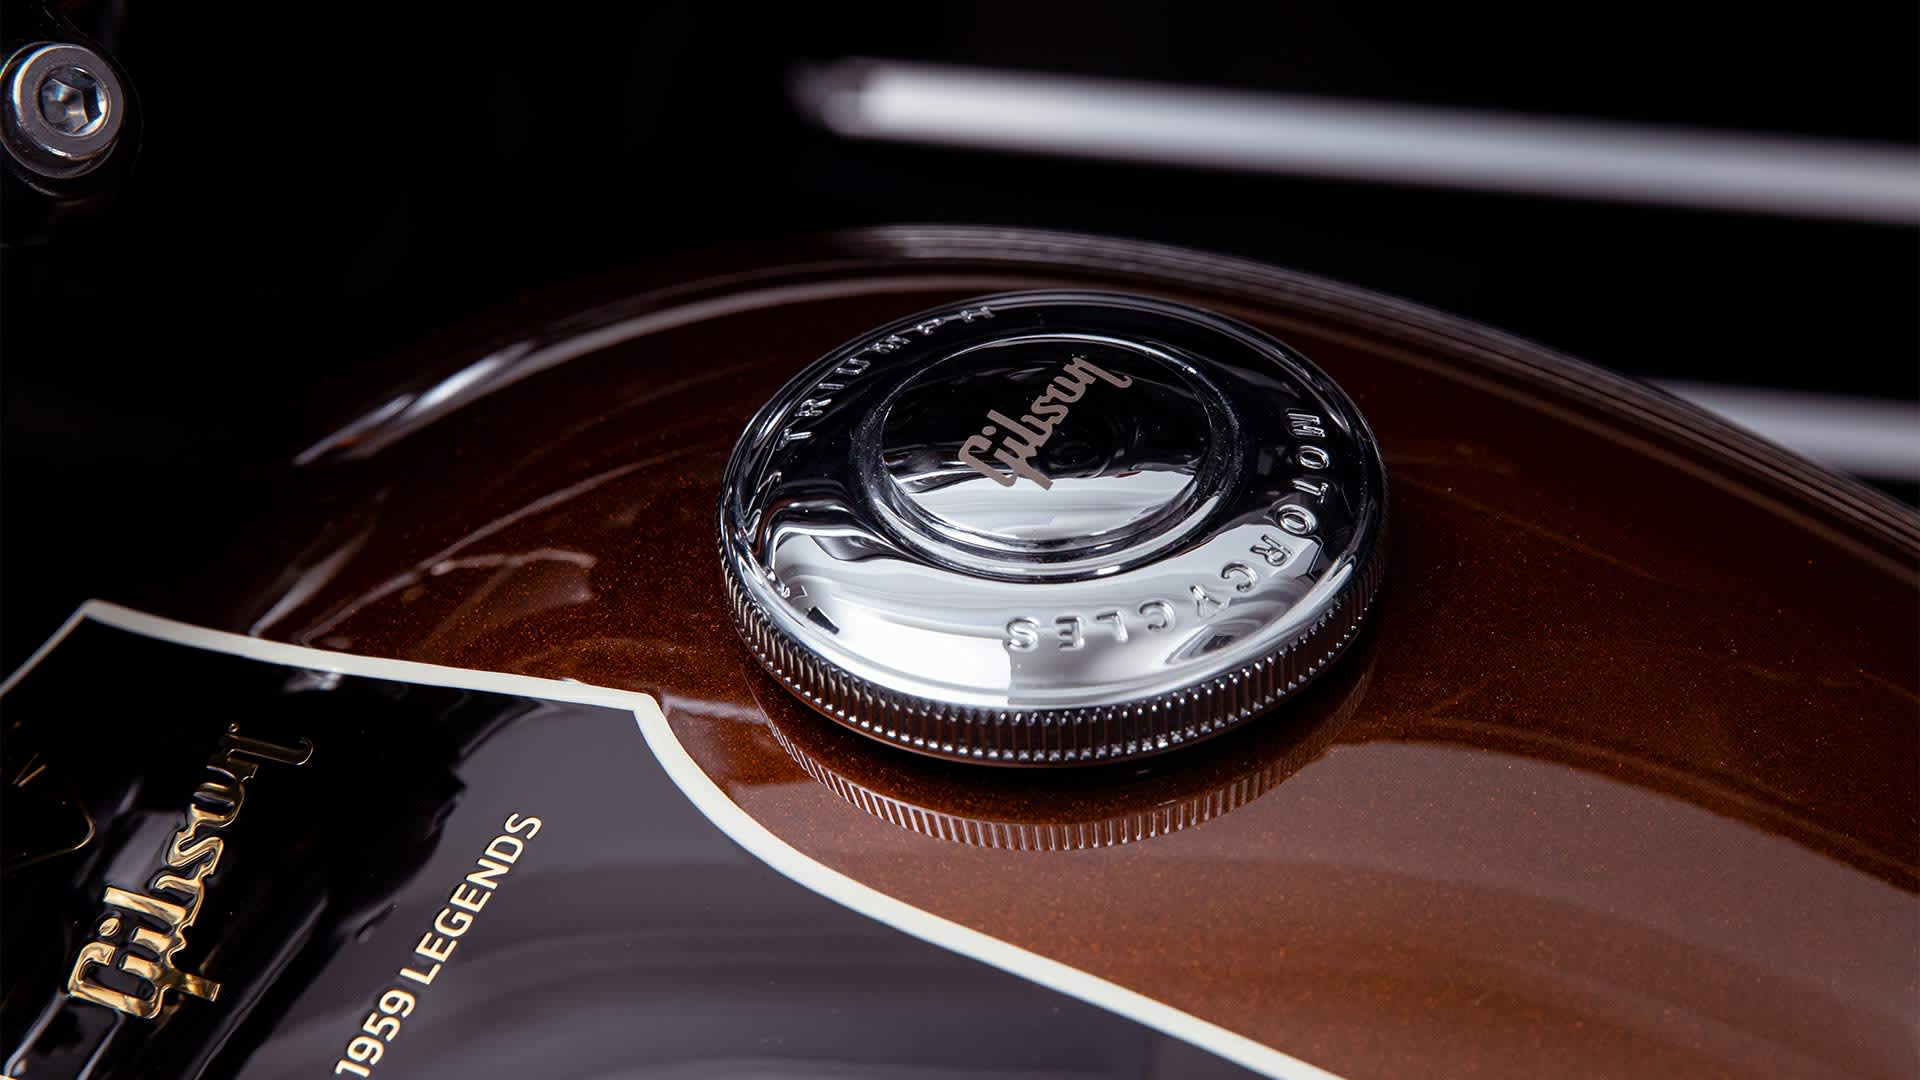 Gibson Guitar and Triumph Motorcycles Collaboration For The Distinguished Gentleman's Ride